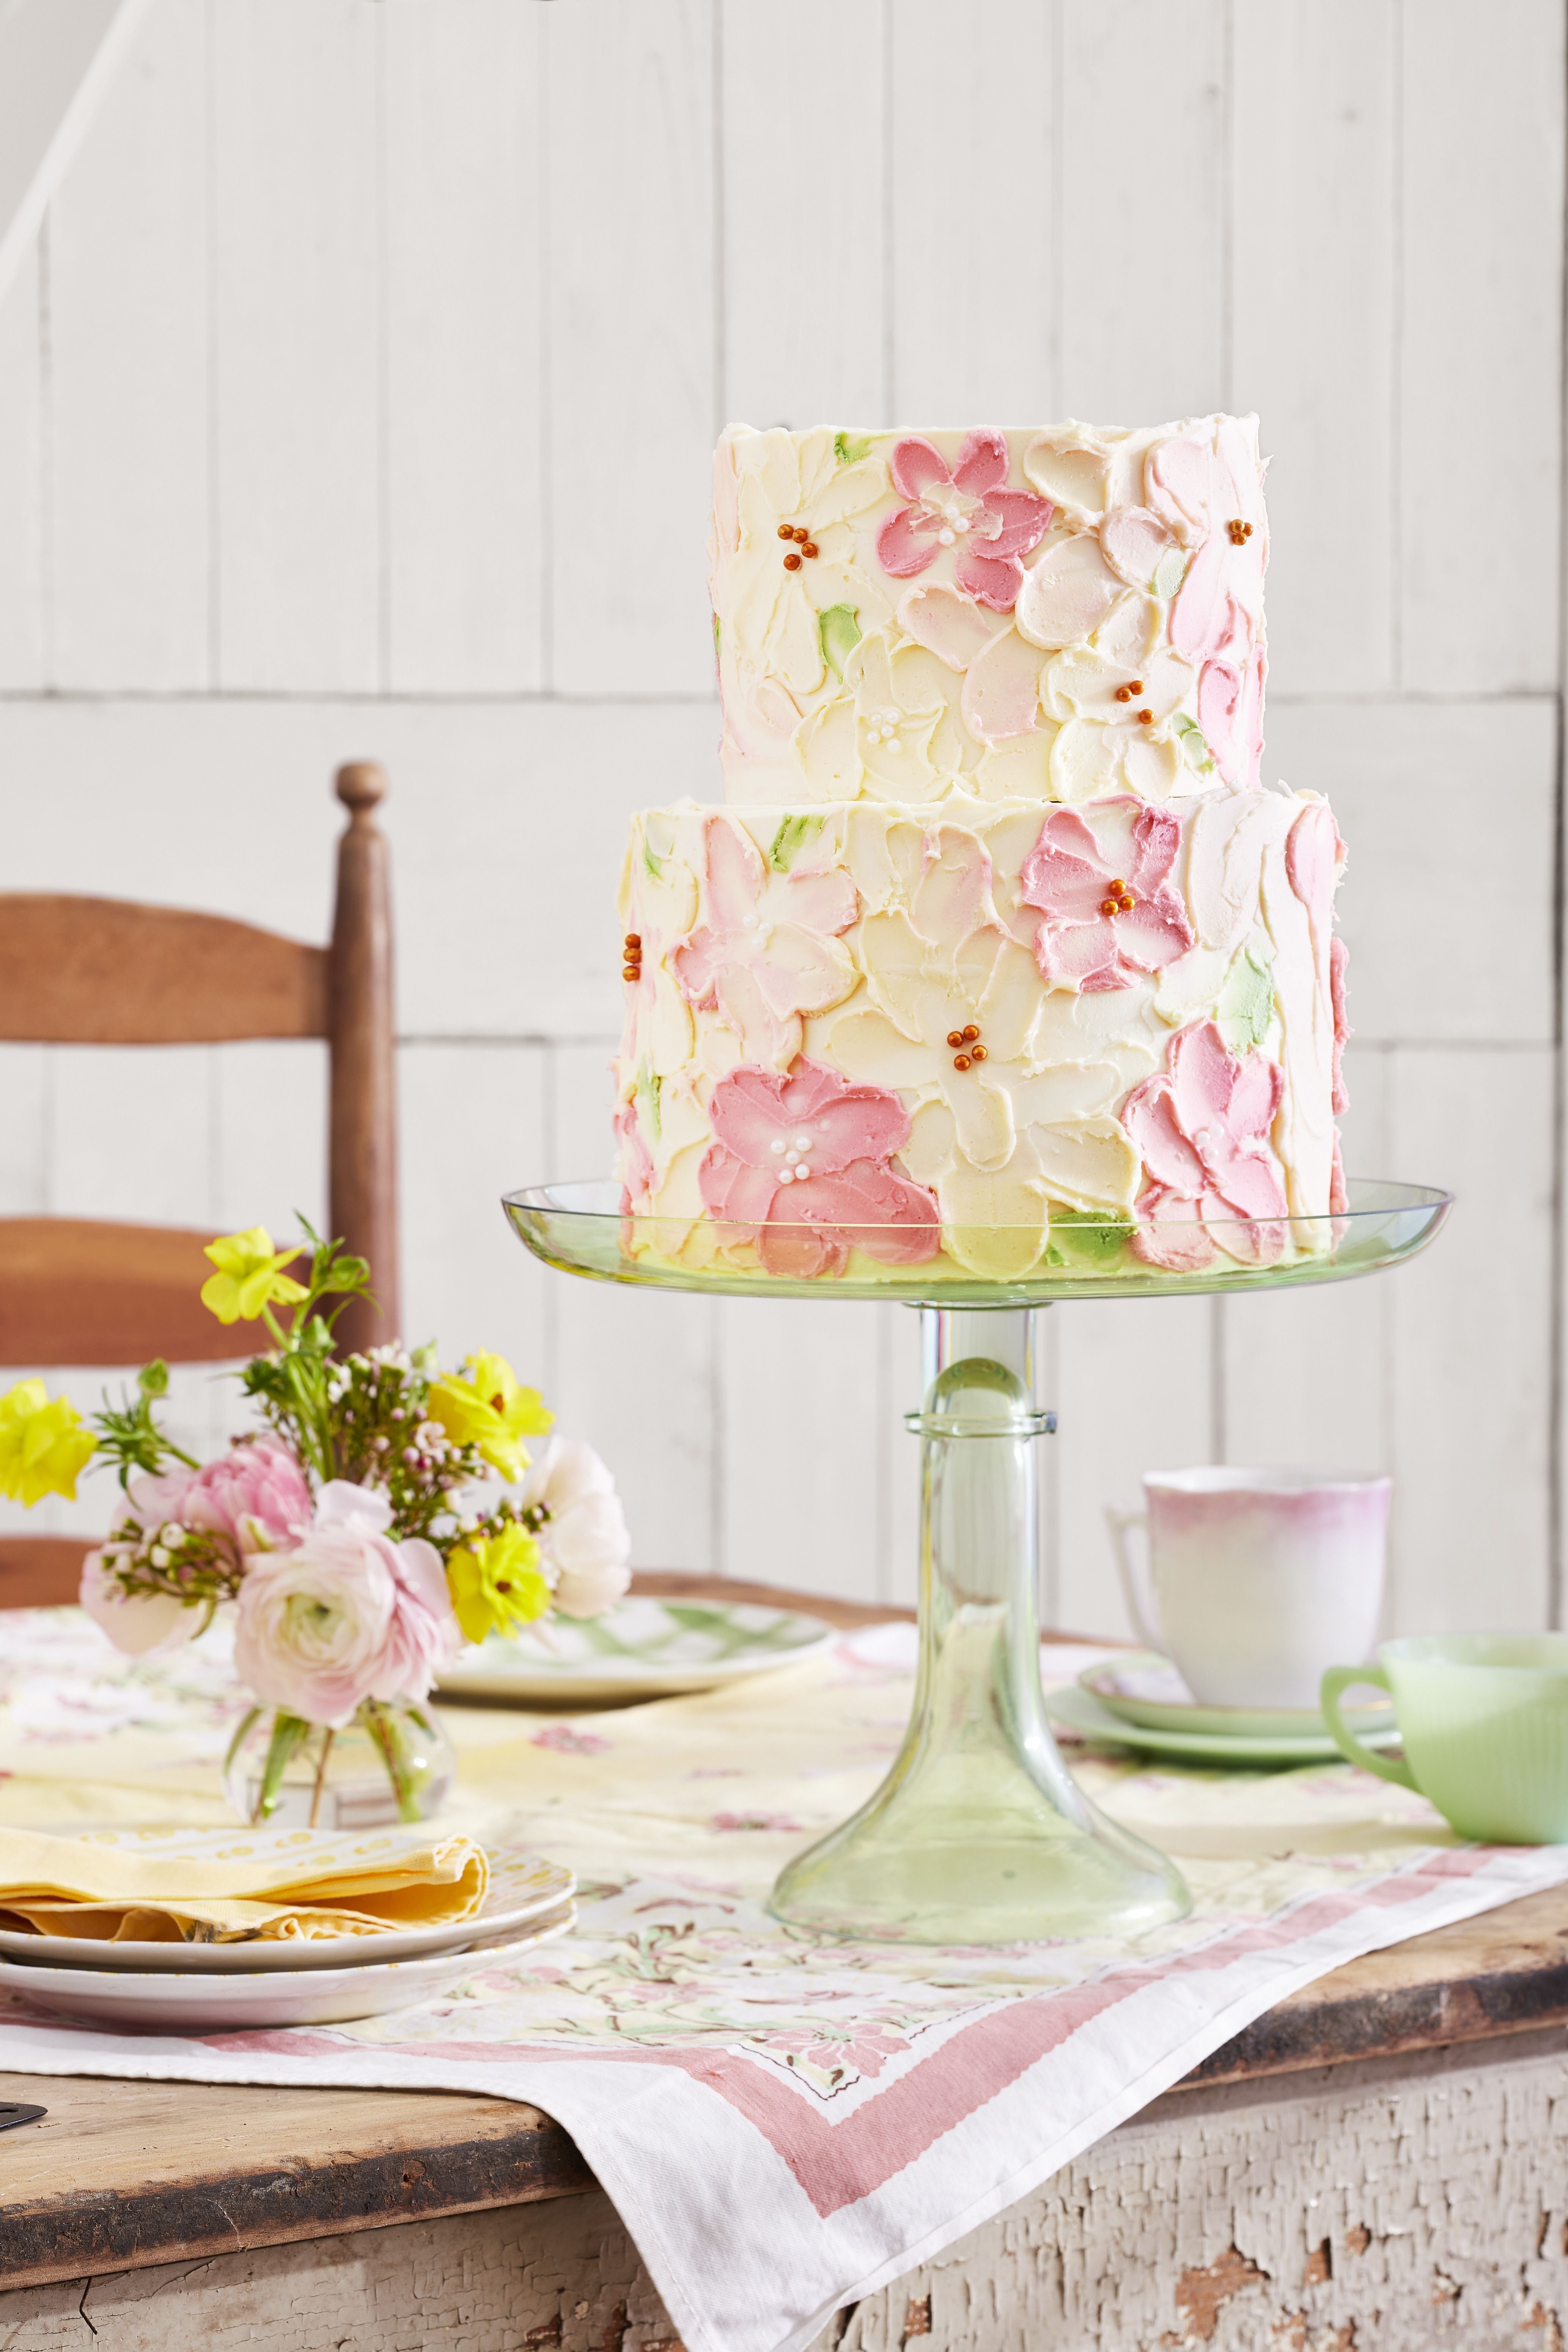 37 Best Mothers Day Cake Recipes - Mother's Day Cake Ideas 2023